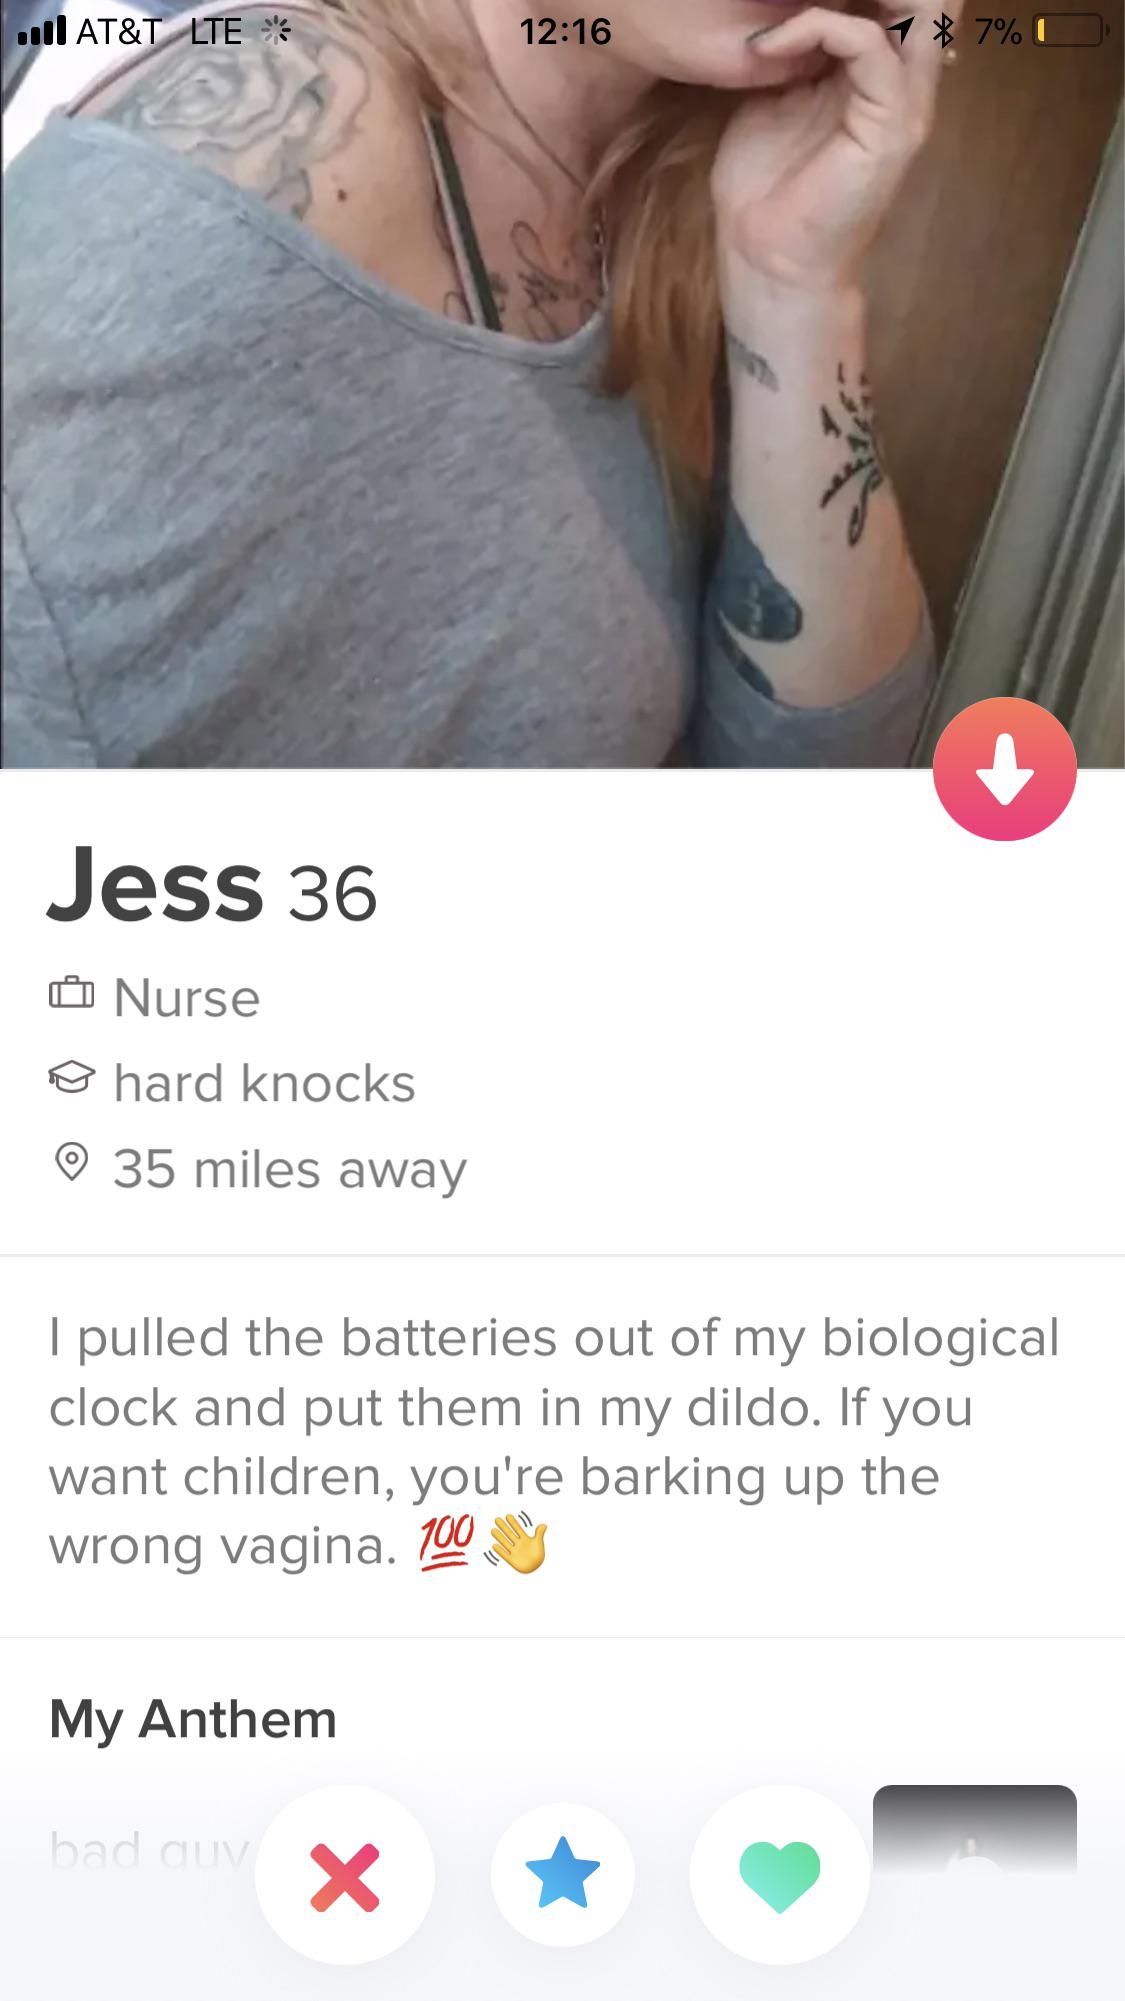 shameless tinder - Jess 36 0 Nurse hard knocks 35 miles away I pulled the batteries out of my biological clock and put them in my dildo. If you want children, you're barking up the wrong vagina. 100 My Anthem bad quv